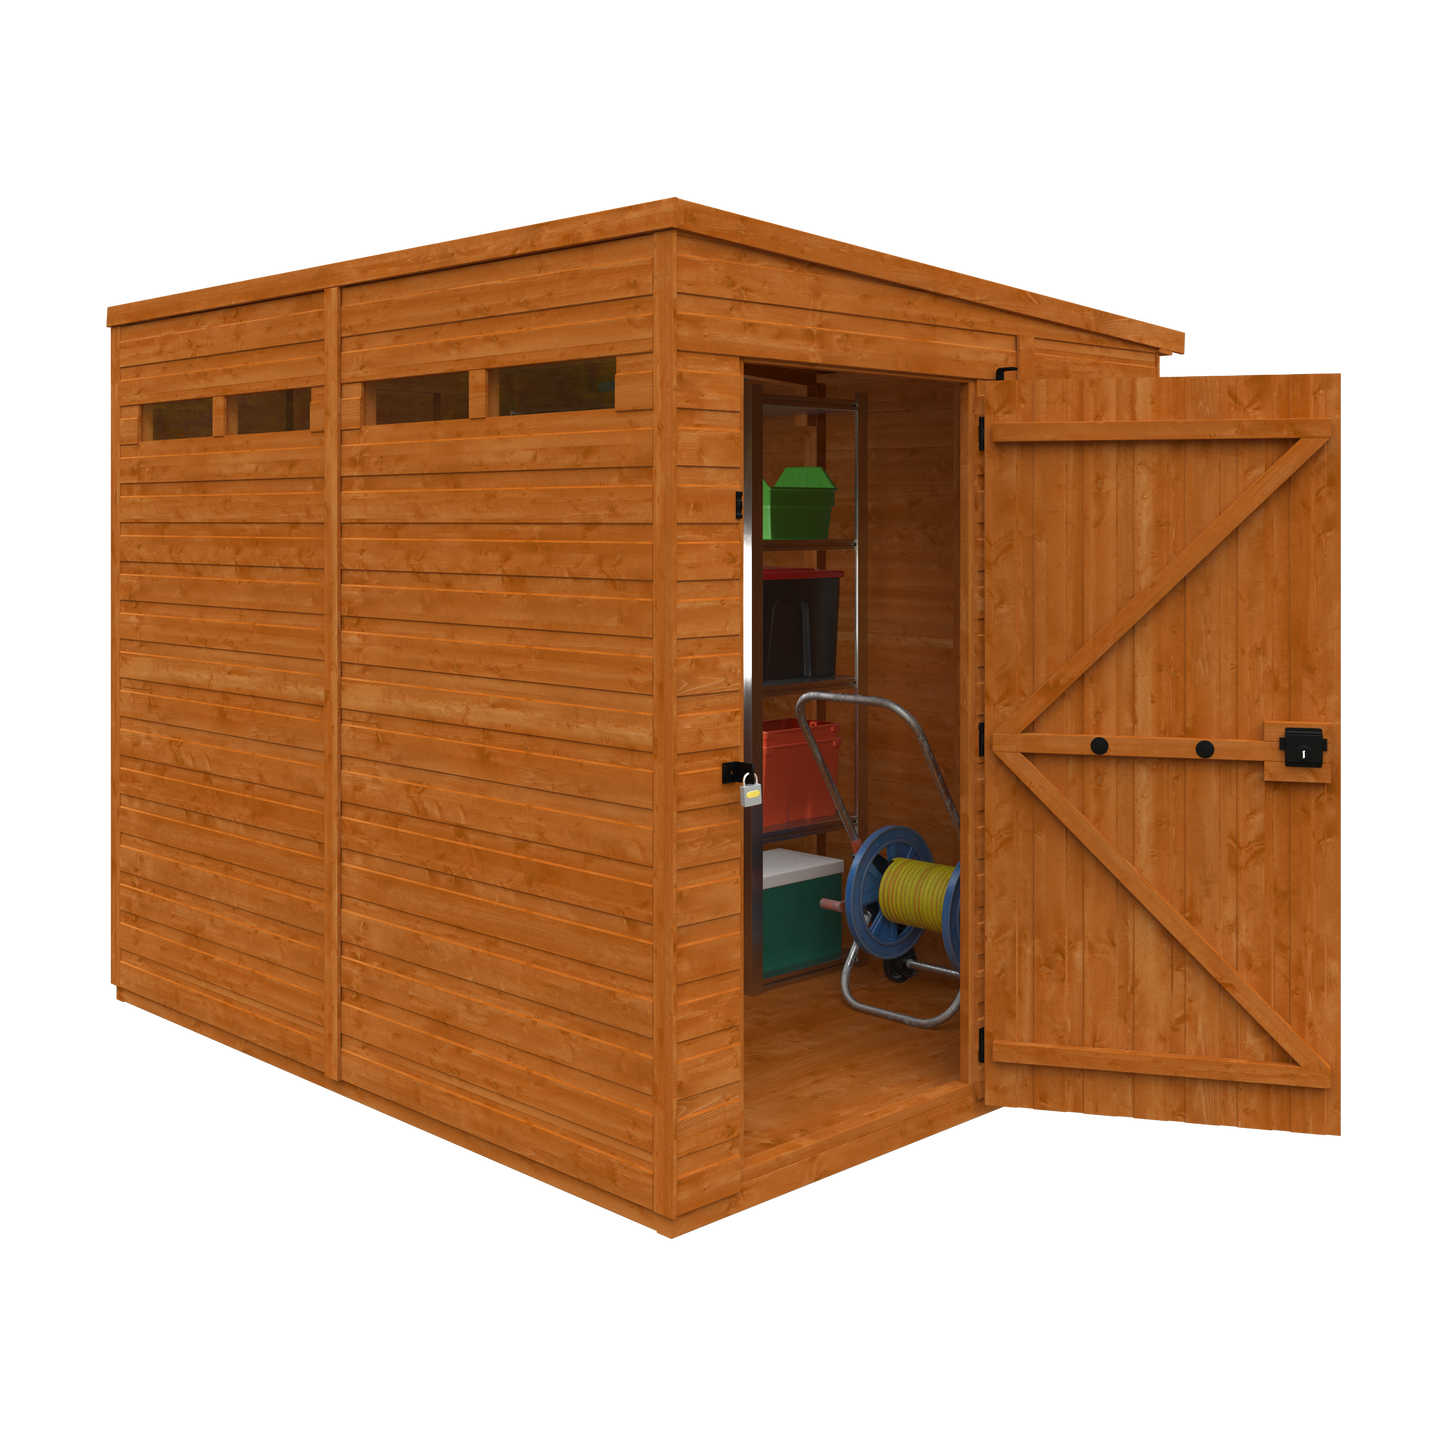 Your Choice Pent Extra Security Wooden Garden Shed - Various Sizes Available